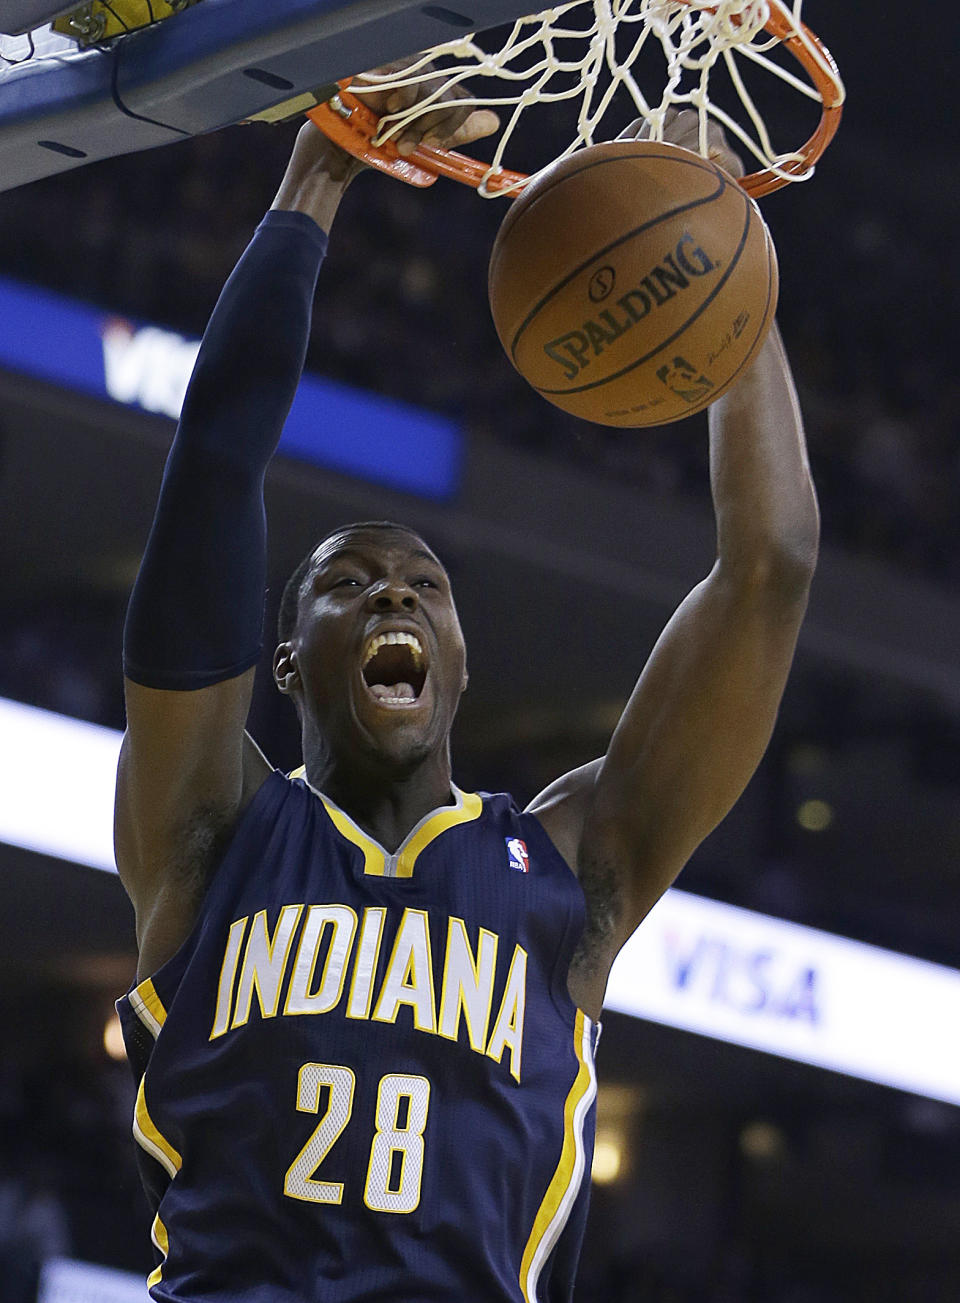 Indiana Pacers' Ian Mahinmi scores against the Golden State Warriors during the first half of an NBA basketball game, Monday, Jan. 20, 2014, in Oakland, Calif. (AP Photo/Ben Margot)